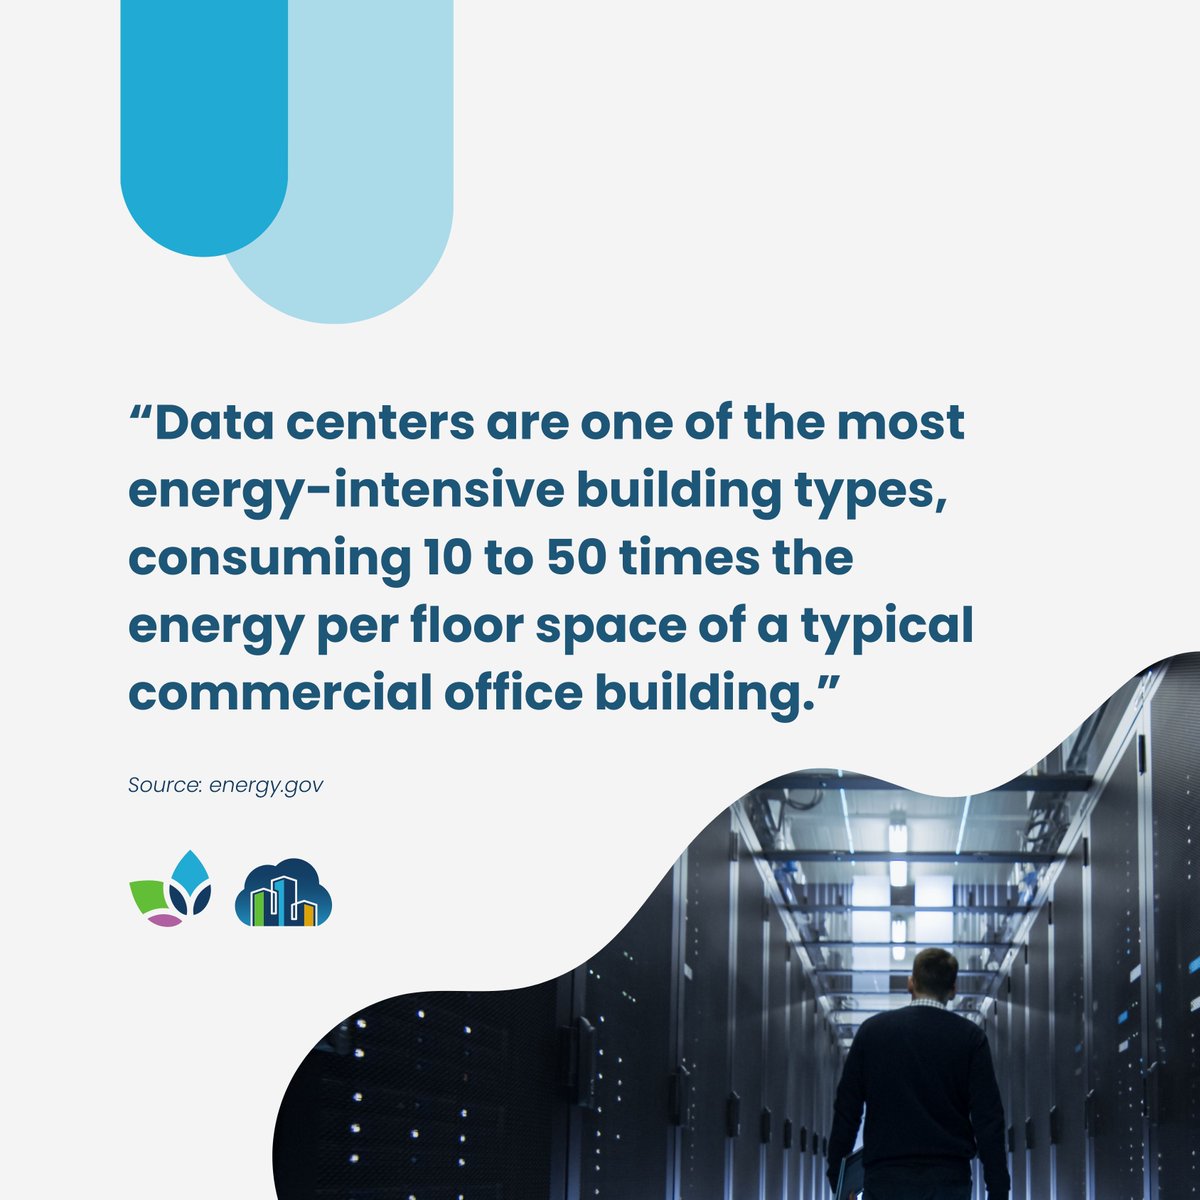 Data centers are major energy consumers. See how #E360 can help optimize your data center's energy usage 👉 sanalife.info/43Z8lIz
•••
#Sanalife #DataCenter #AI #IoT #SaaS #technology #network #cloud #server #manager #management #FacilityManagement #HealthyBuildings #B2B